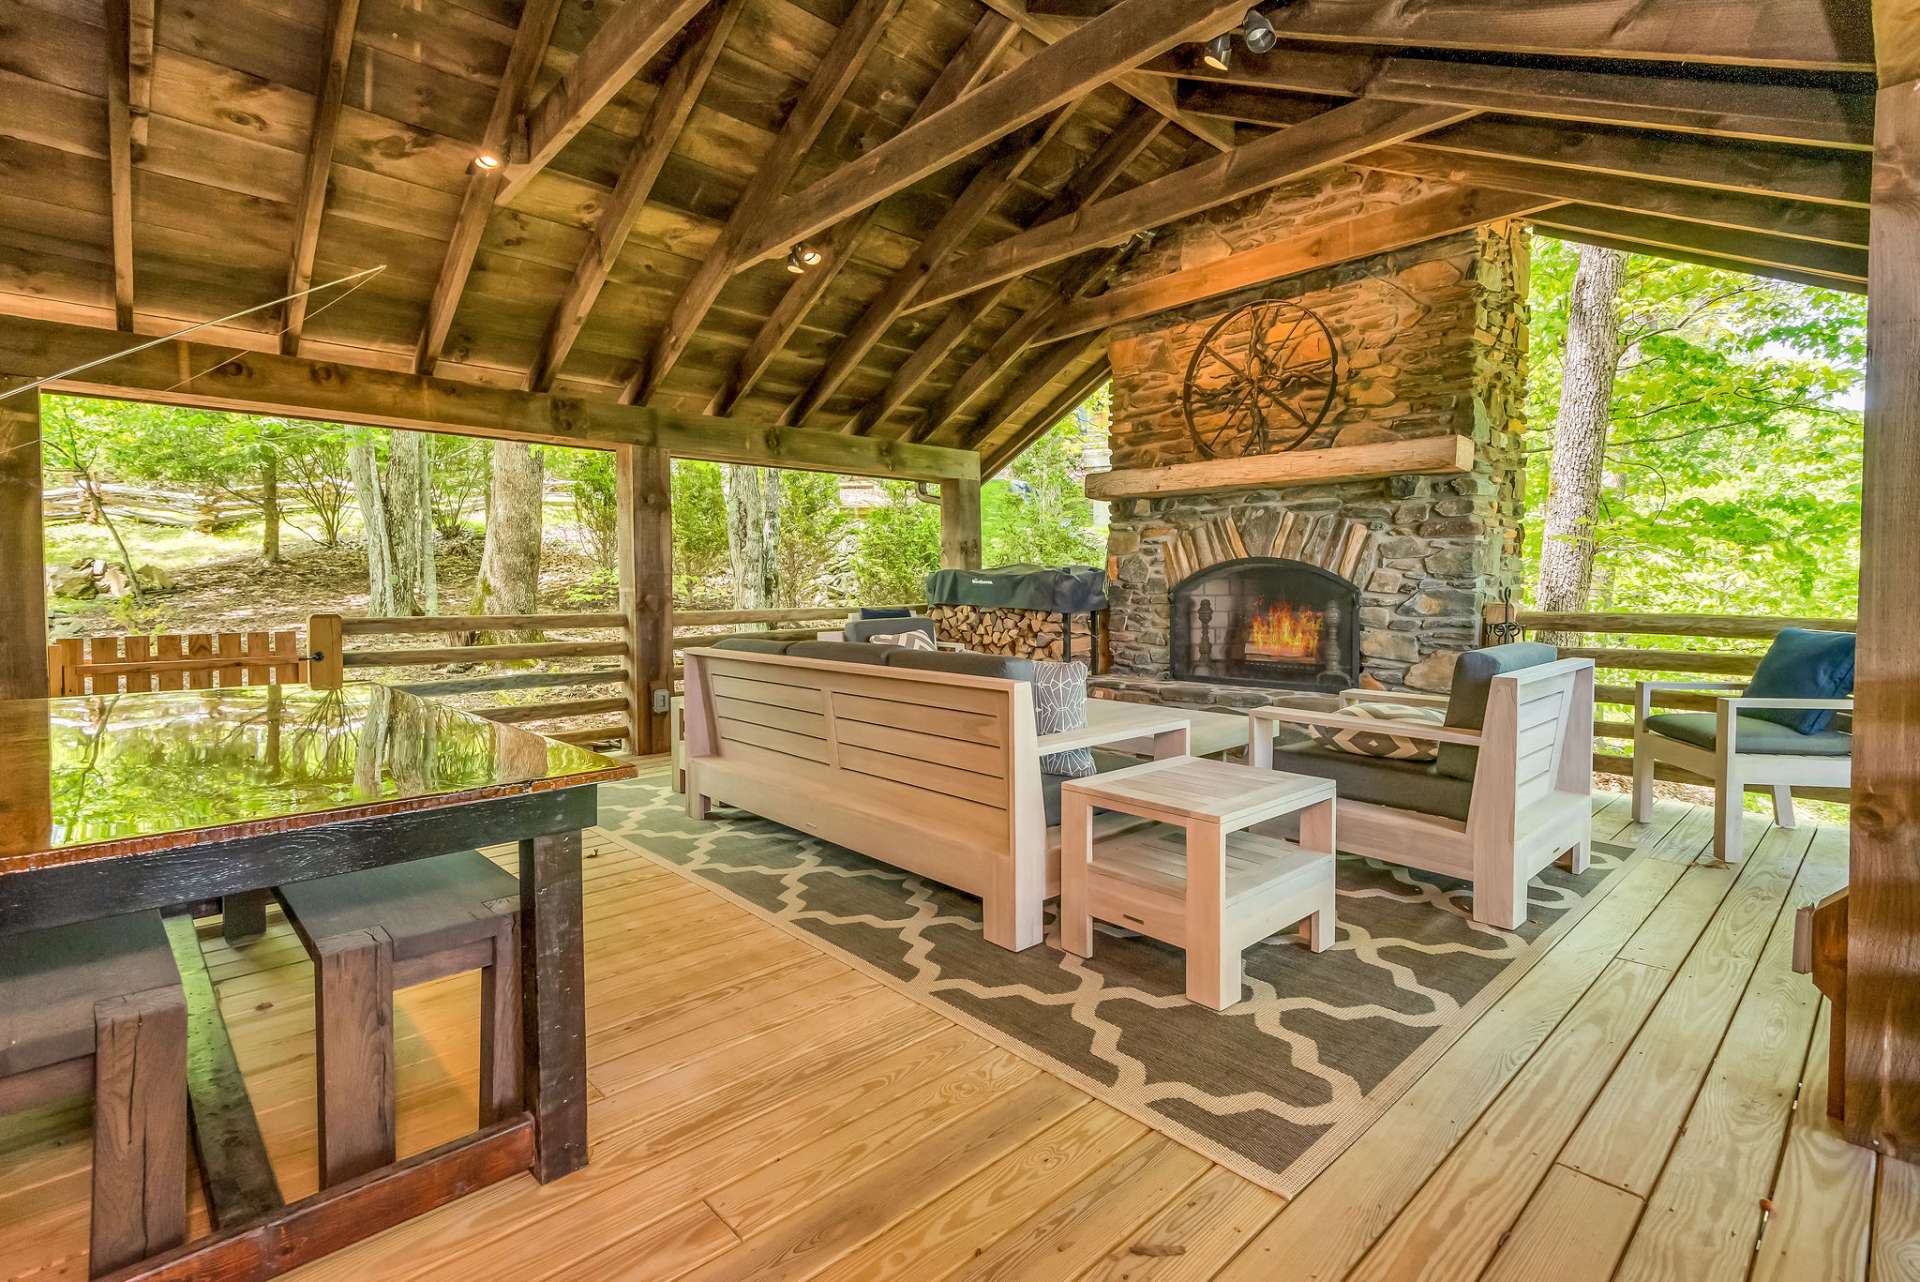 Plenty of space for outdoor dining and entertaining or simply relaxing by the wood-burning fireplace on cool summer evenings in the Blue Ridge Mountains.